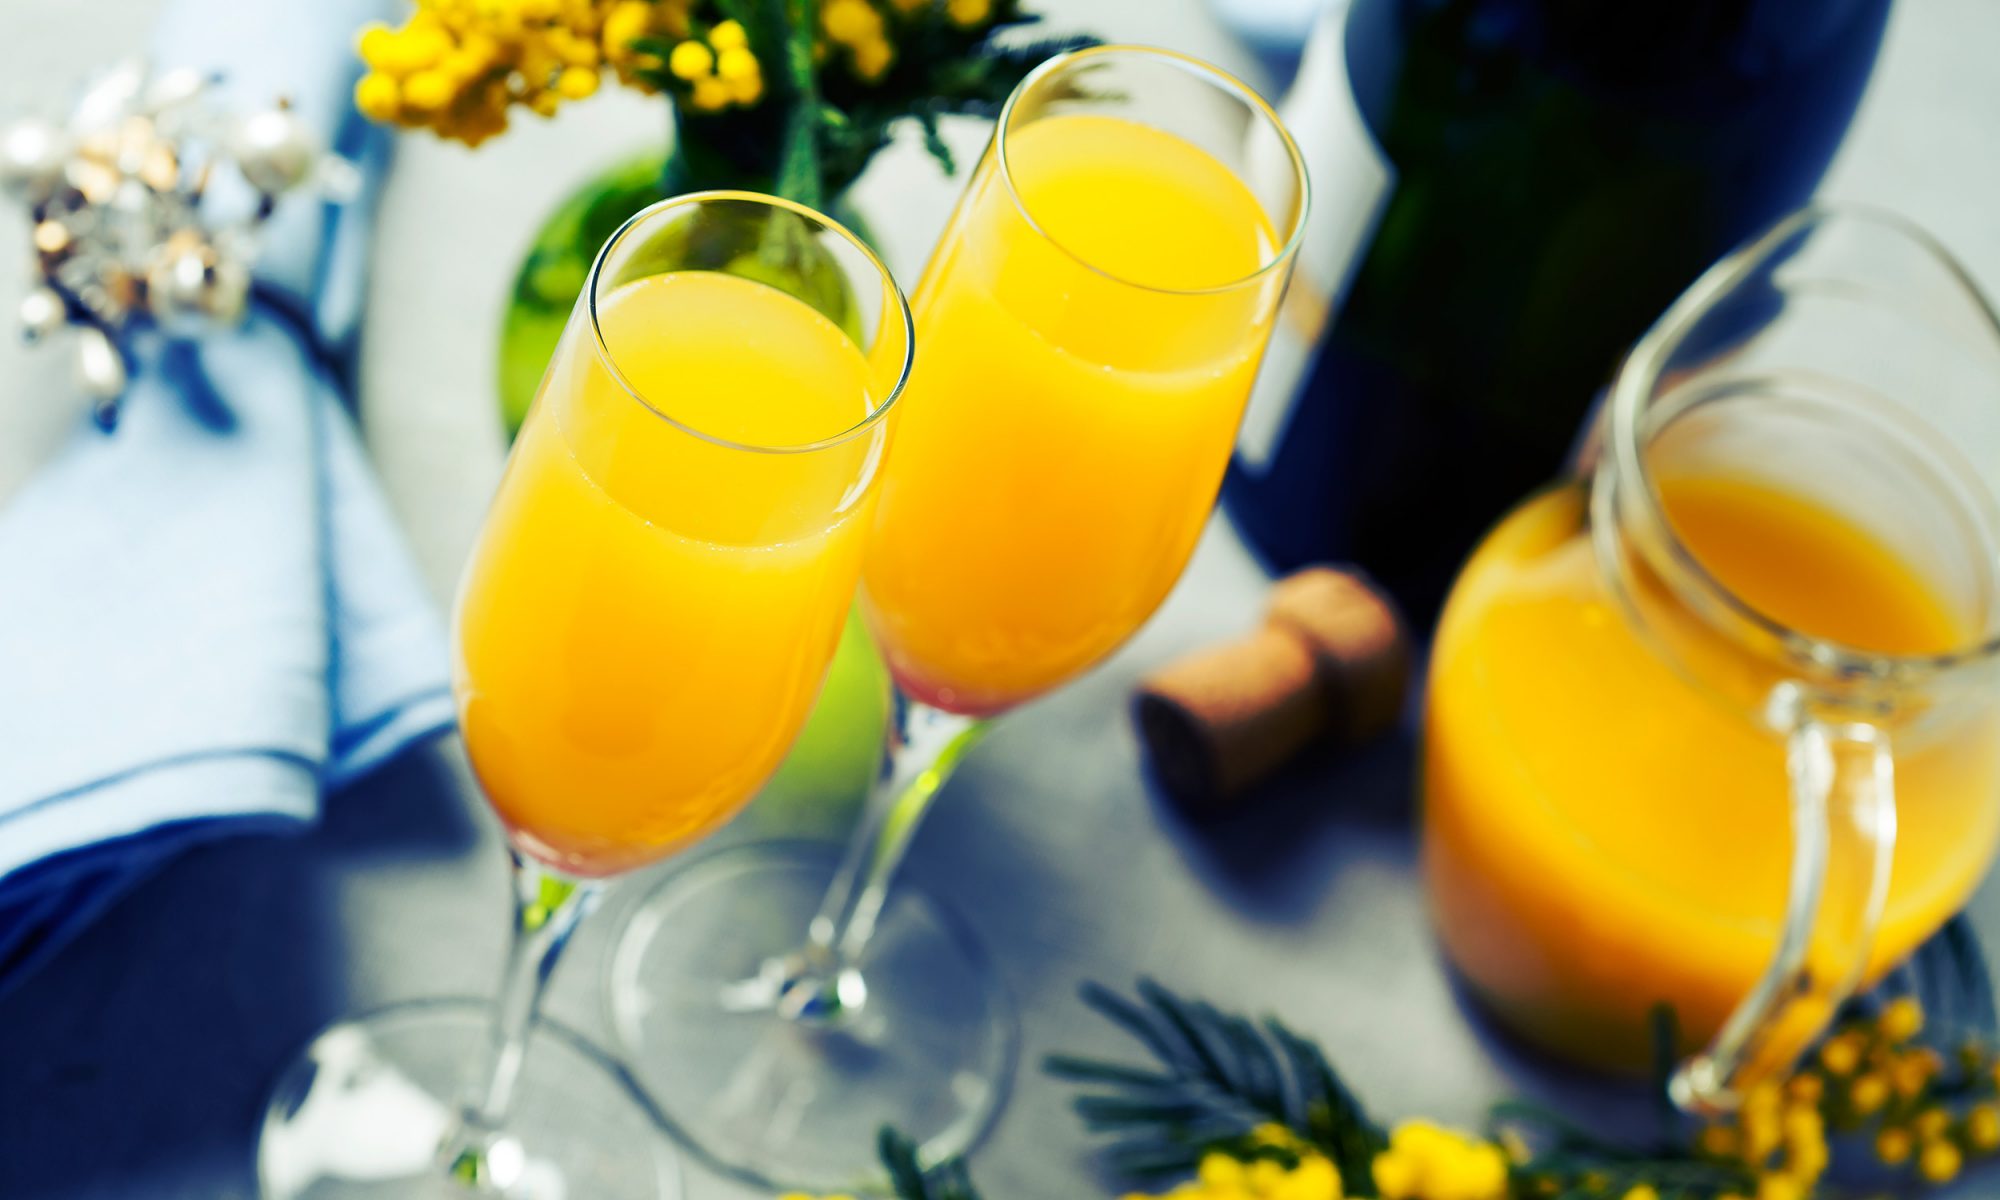 EC: How the Mimosa Became the Official Drink of Brunch